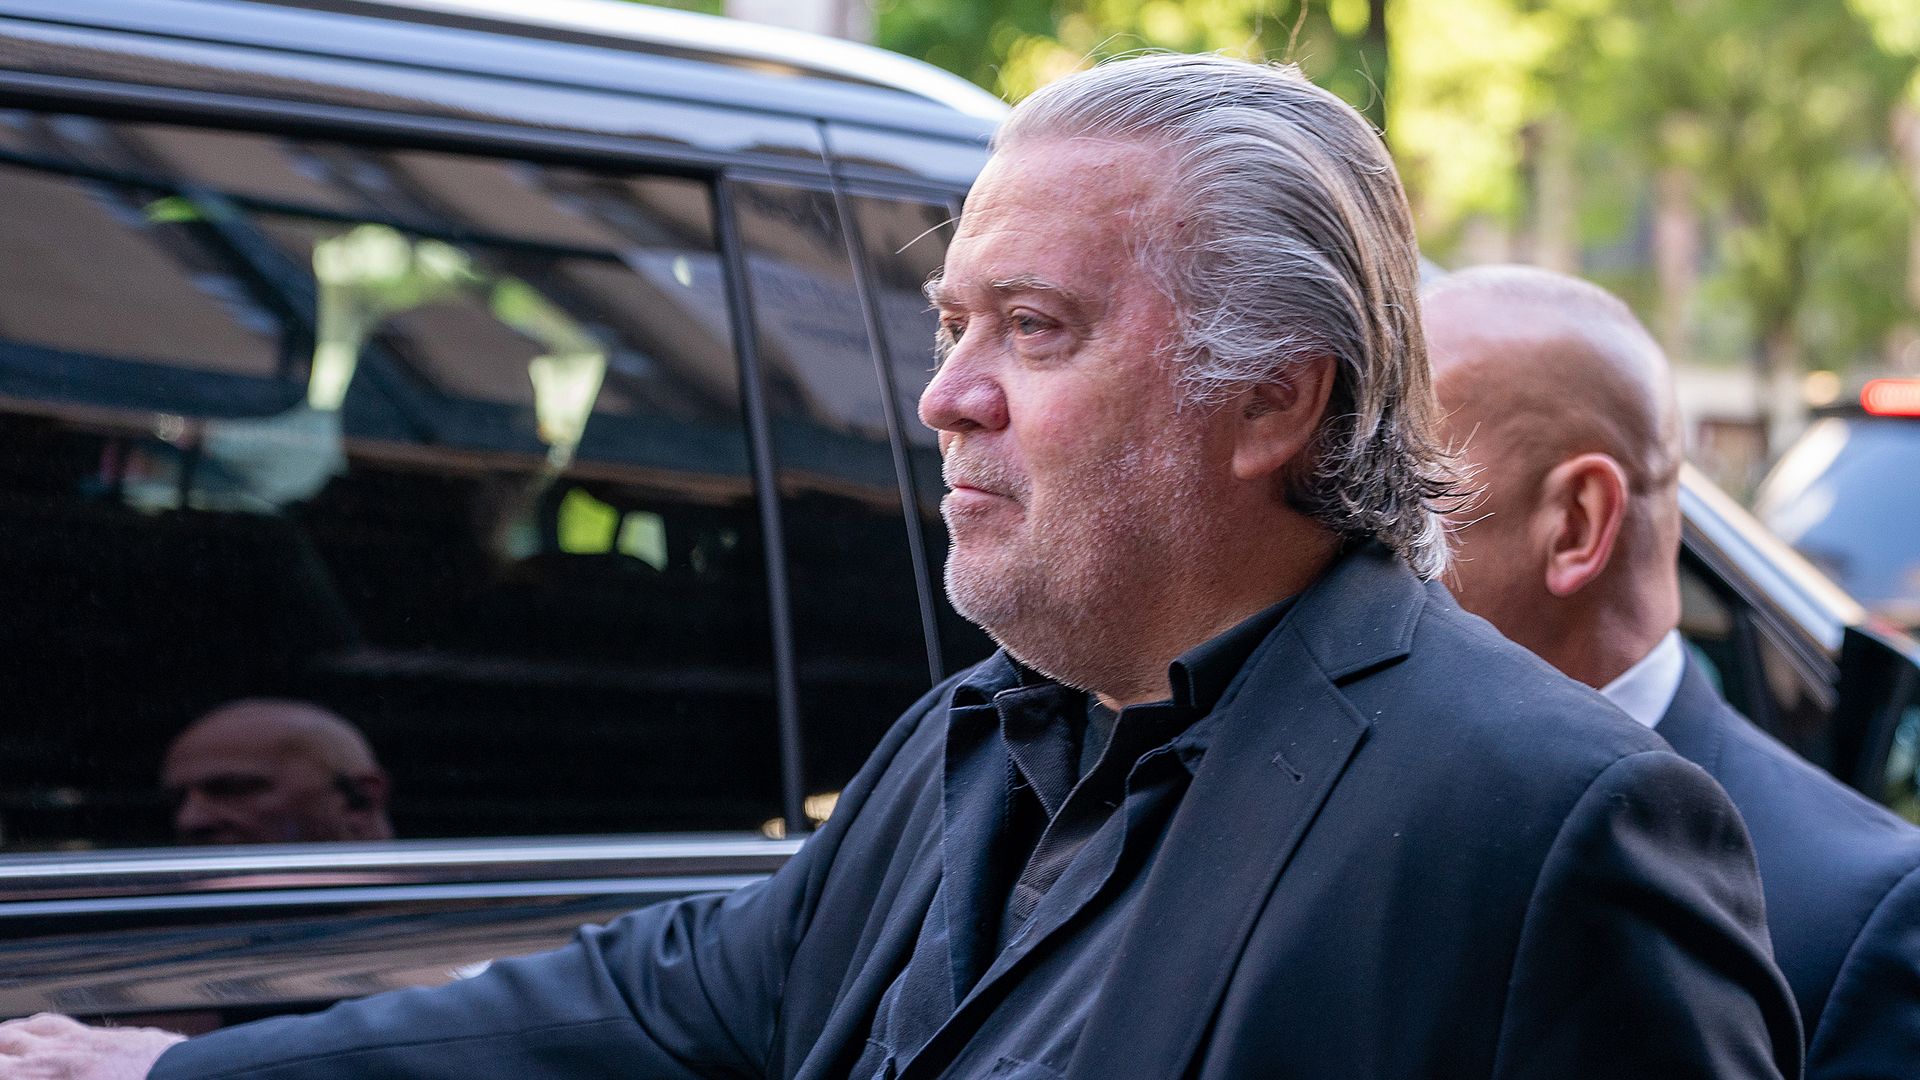 Steve Bannon, former advisor to President Donald Trump, departs New York State Supreme Court on May 25, 2023 in New York City